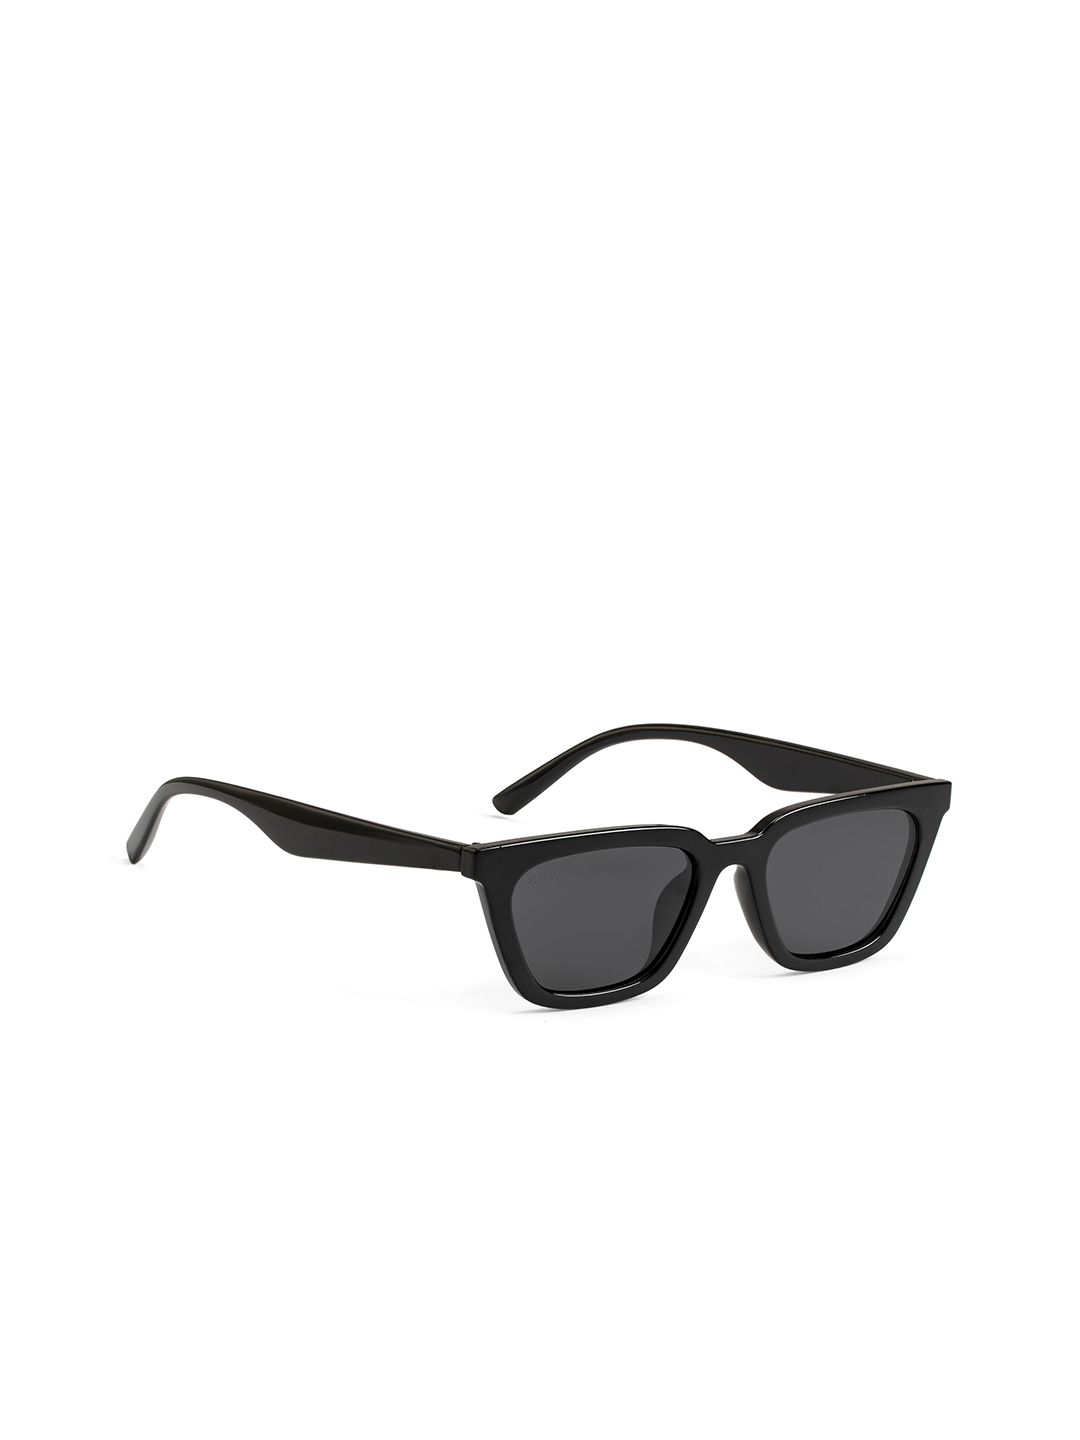 ROYAL SON Unisex Black Lens & Black Square Sunglasses with Polarised & UV Protected Lens Price in India